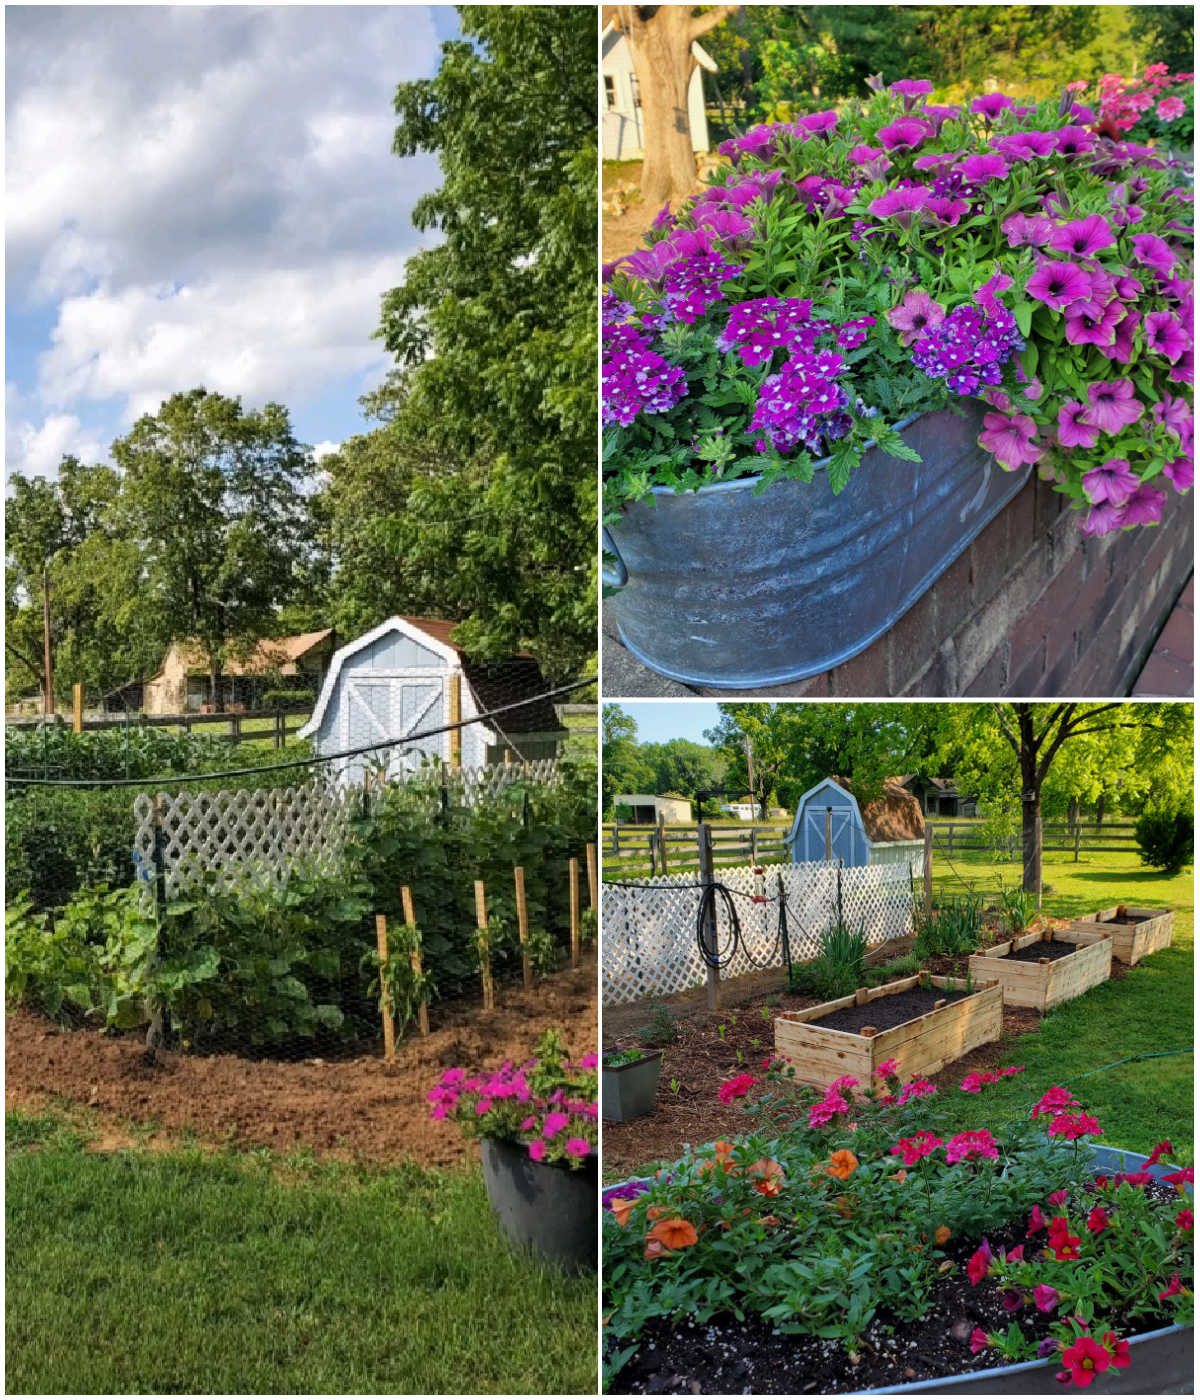 Images of vegetable garden and colorful flowers to attract hummingbirds.